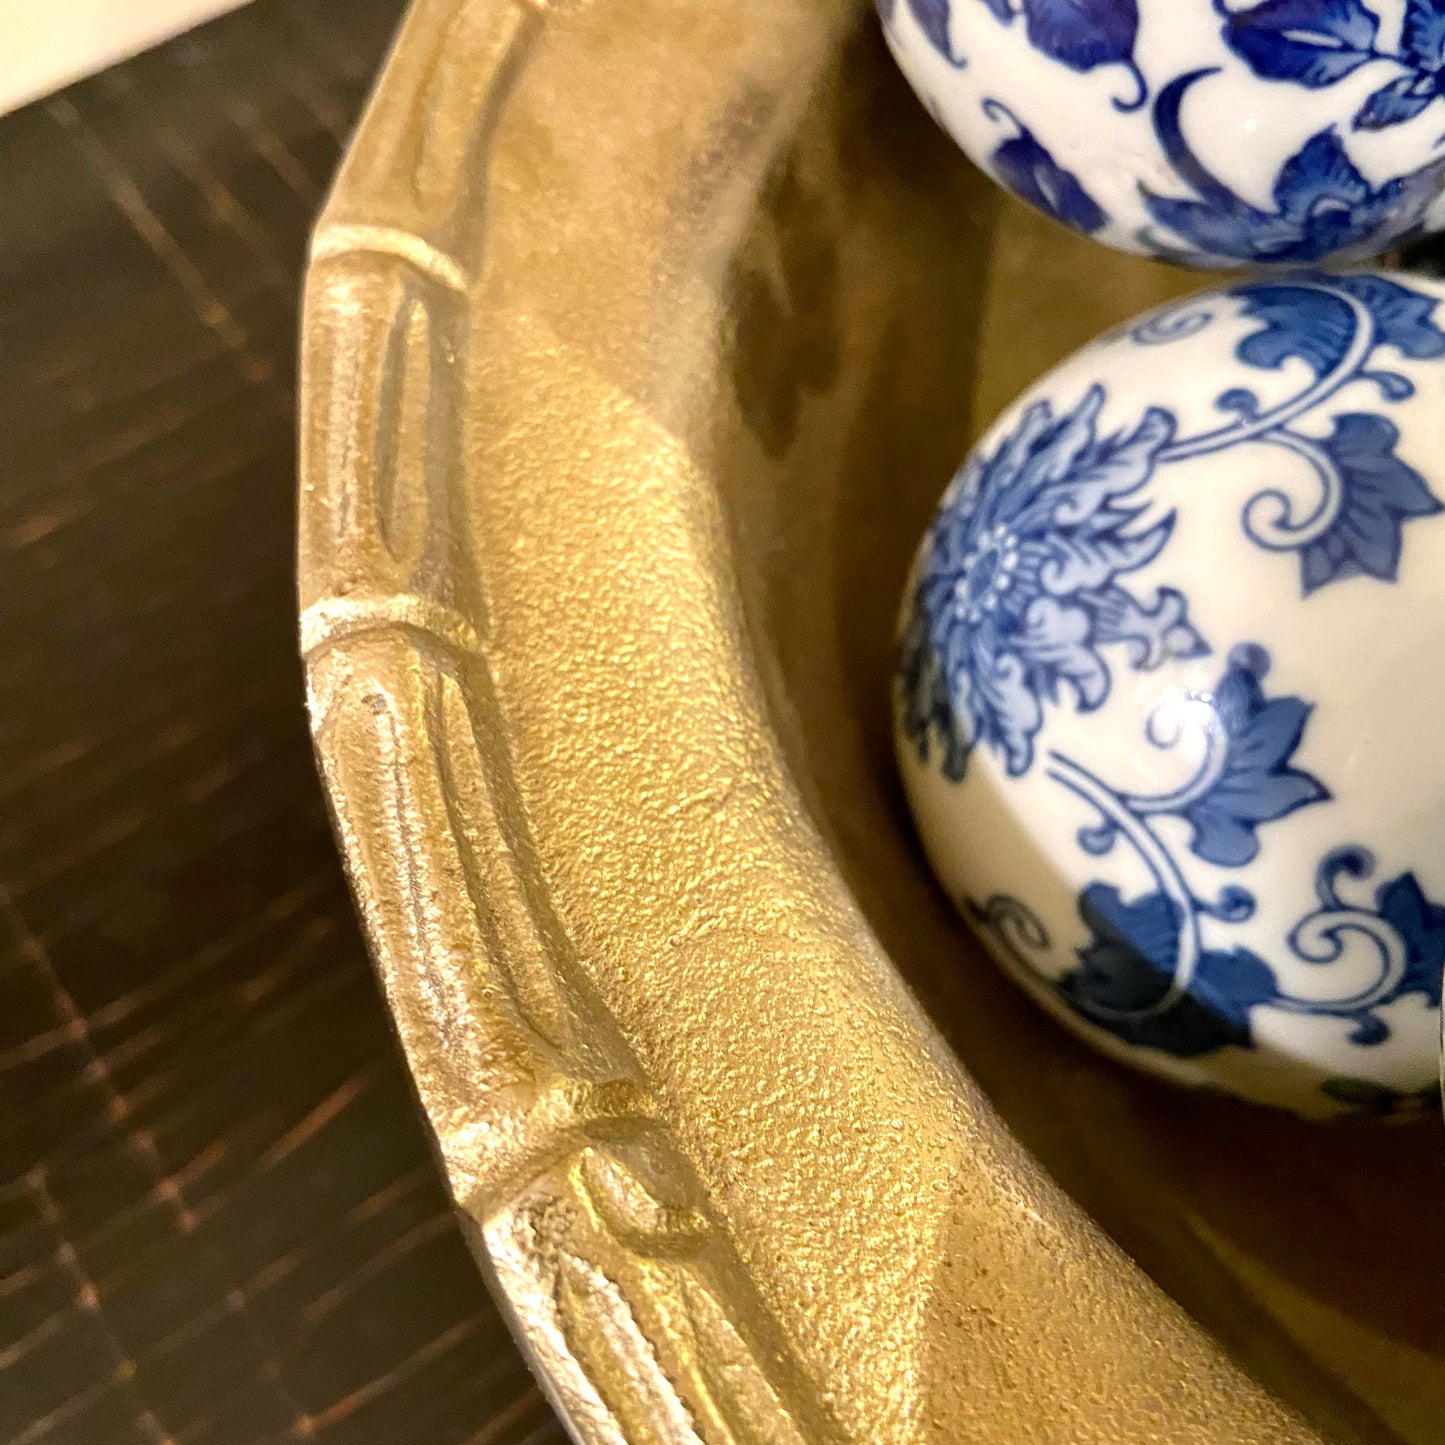 Chic brushed gold faux bamboo large serving bowl by designer Tahari.